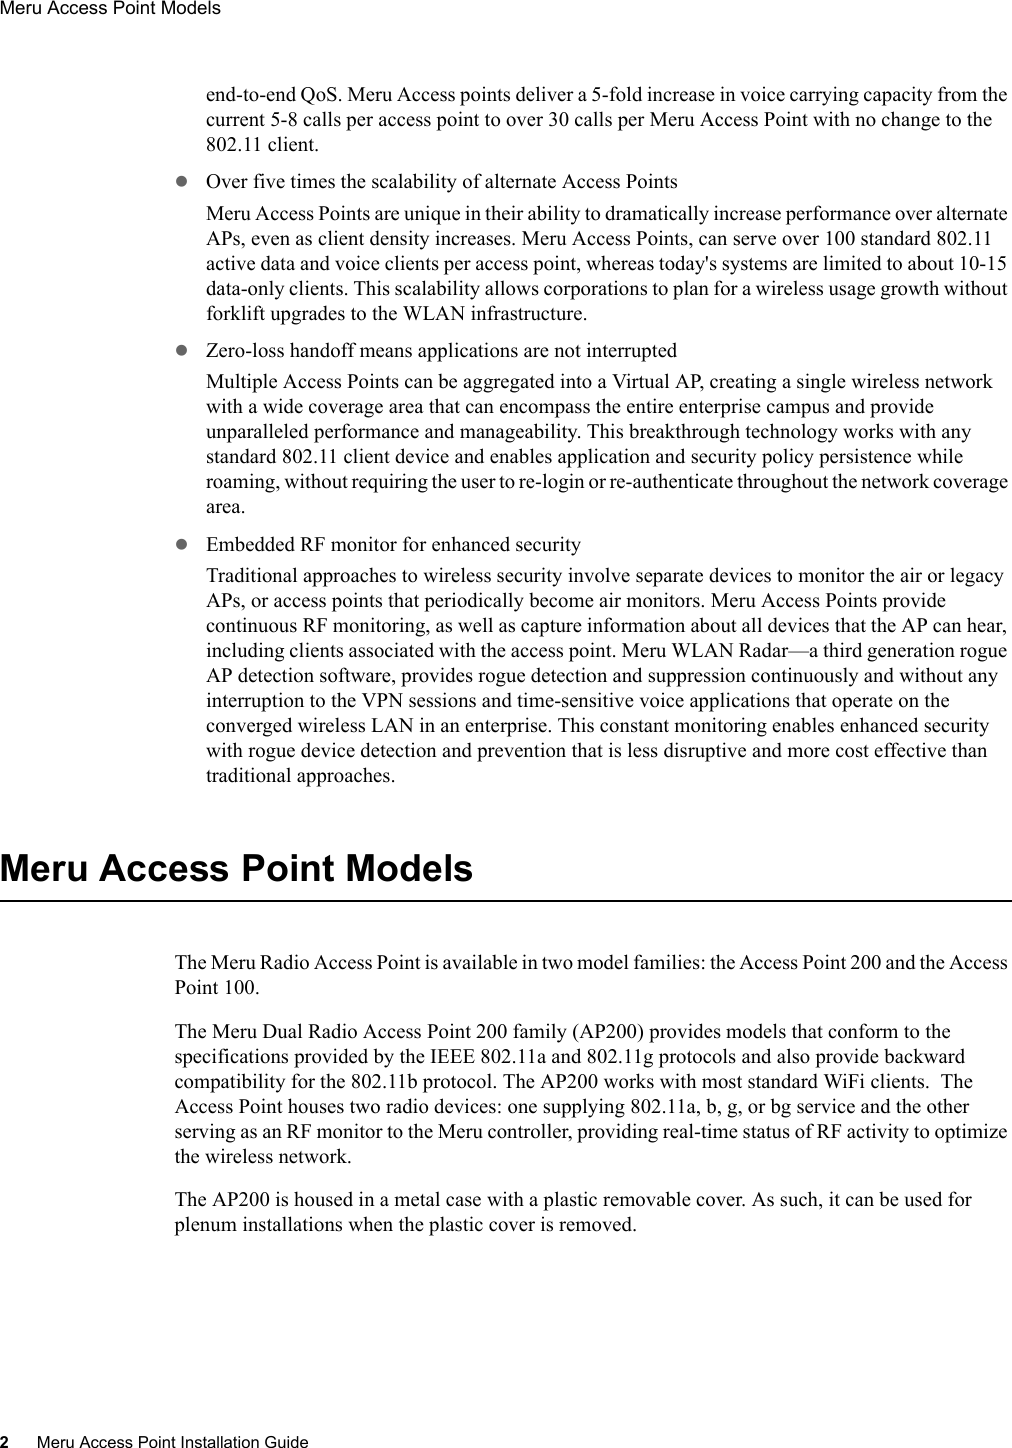 2Meru Access Point Installation GuideMeru Access Point Models end-to-end QoS. Meru Access points deliver a 5-fold increase in voice carrying capacity from the current 5-8 calls per access point to over 30 calls per Meru Access Point with no change to the 802.11 client.zOver five times the scalability of alternate Access PointsMeru Access Points are unique in their ability to dramatically increase performance over alternate APs, even as client density increases. Meru Access Points, can serve over 100 standard 802.11 active data and voice clients per access point, whereas today&apos;s systems are limited to about 10-15 data-only clients. This scalability allows corporations to plan for a wireless usage growth without forklift upgrades to the WLAN infrastructure.zZero-loss handoff means applications are not interruptedMultiple Access Points can be aggregated into a Virtual AP, creating a single wireless network with a wide coverage area that can encompass the entire enterprise campus and provide unparalleled performance and manageability. This breakthrough technology works with any standard 802.11 client device and enables application and security policy persistence while roaming, without requiring the user to re-login or re-authenticate throughout the network coverage area.zEmbedded RF monitor for enhanced securityTraditional approaches to wireless security involve separate devices to monitor the air or legacy APs, or access points that periodically become air monitors. Meru Access Points provide continuous RF monitoring, as well as capture information about all devices that the AP can hear, including clients associated with the access point. Meru WLAN Radar—a third generation rogue AP detection software, provides rogue detection and suppression continuously and without any interruption to the VPN sessions and time-sensitive voice applications that operate on the converged wireless LAN in an enterprise. This constant monitoring enables enhanced security with rogue device detection and prevention that is less disruptive and more cost effective than traditional approaches. Meru Access Point ModelsThe Meru Radio Access Point is available in two model families: the Access Point 200 and the Access Point 100.The Meru Dual Radio Access Point 200 family (AP200) provides models that conform to the specifications provided by the IEEE 802.11a and 802.11g protocols and also provide backward compatibility for the 802.11b protocol. The AP200 works with most standard WiFi clients.  The Access Point houses two radio devices: one supplying 802.11a, b, g, or bg service and the other serving as an RF monitor to the Meru controller, providing real-time status of RF activity to optimize the wireless network.The AP200 is housed in a metal case with a plastic removable cover. As such, it can be used for plenum installations when the plastic cover is removed.